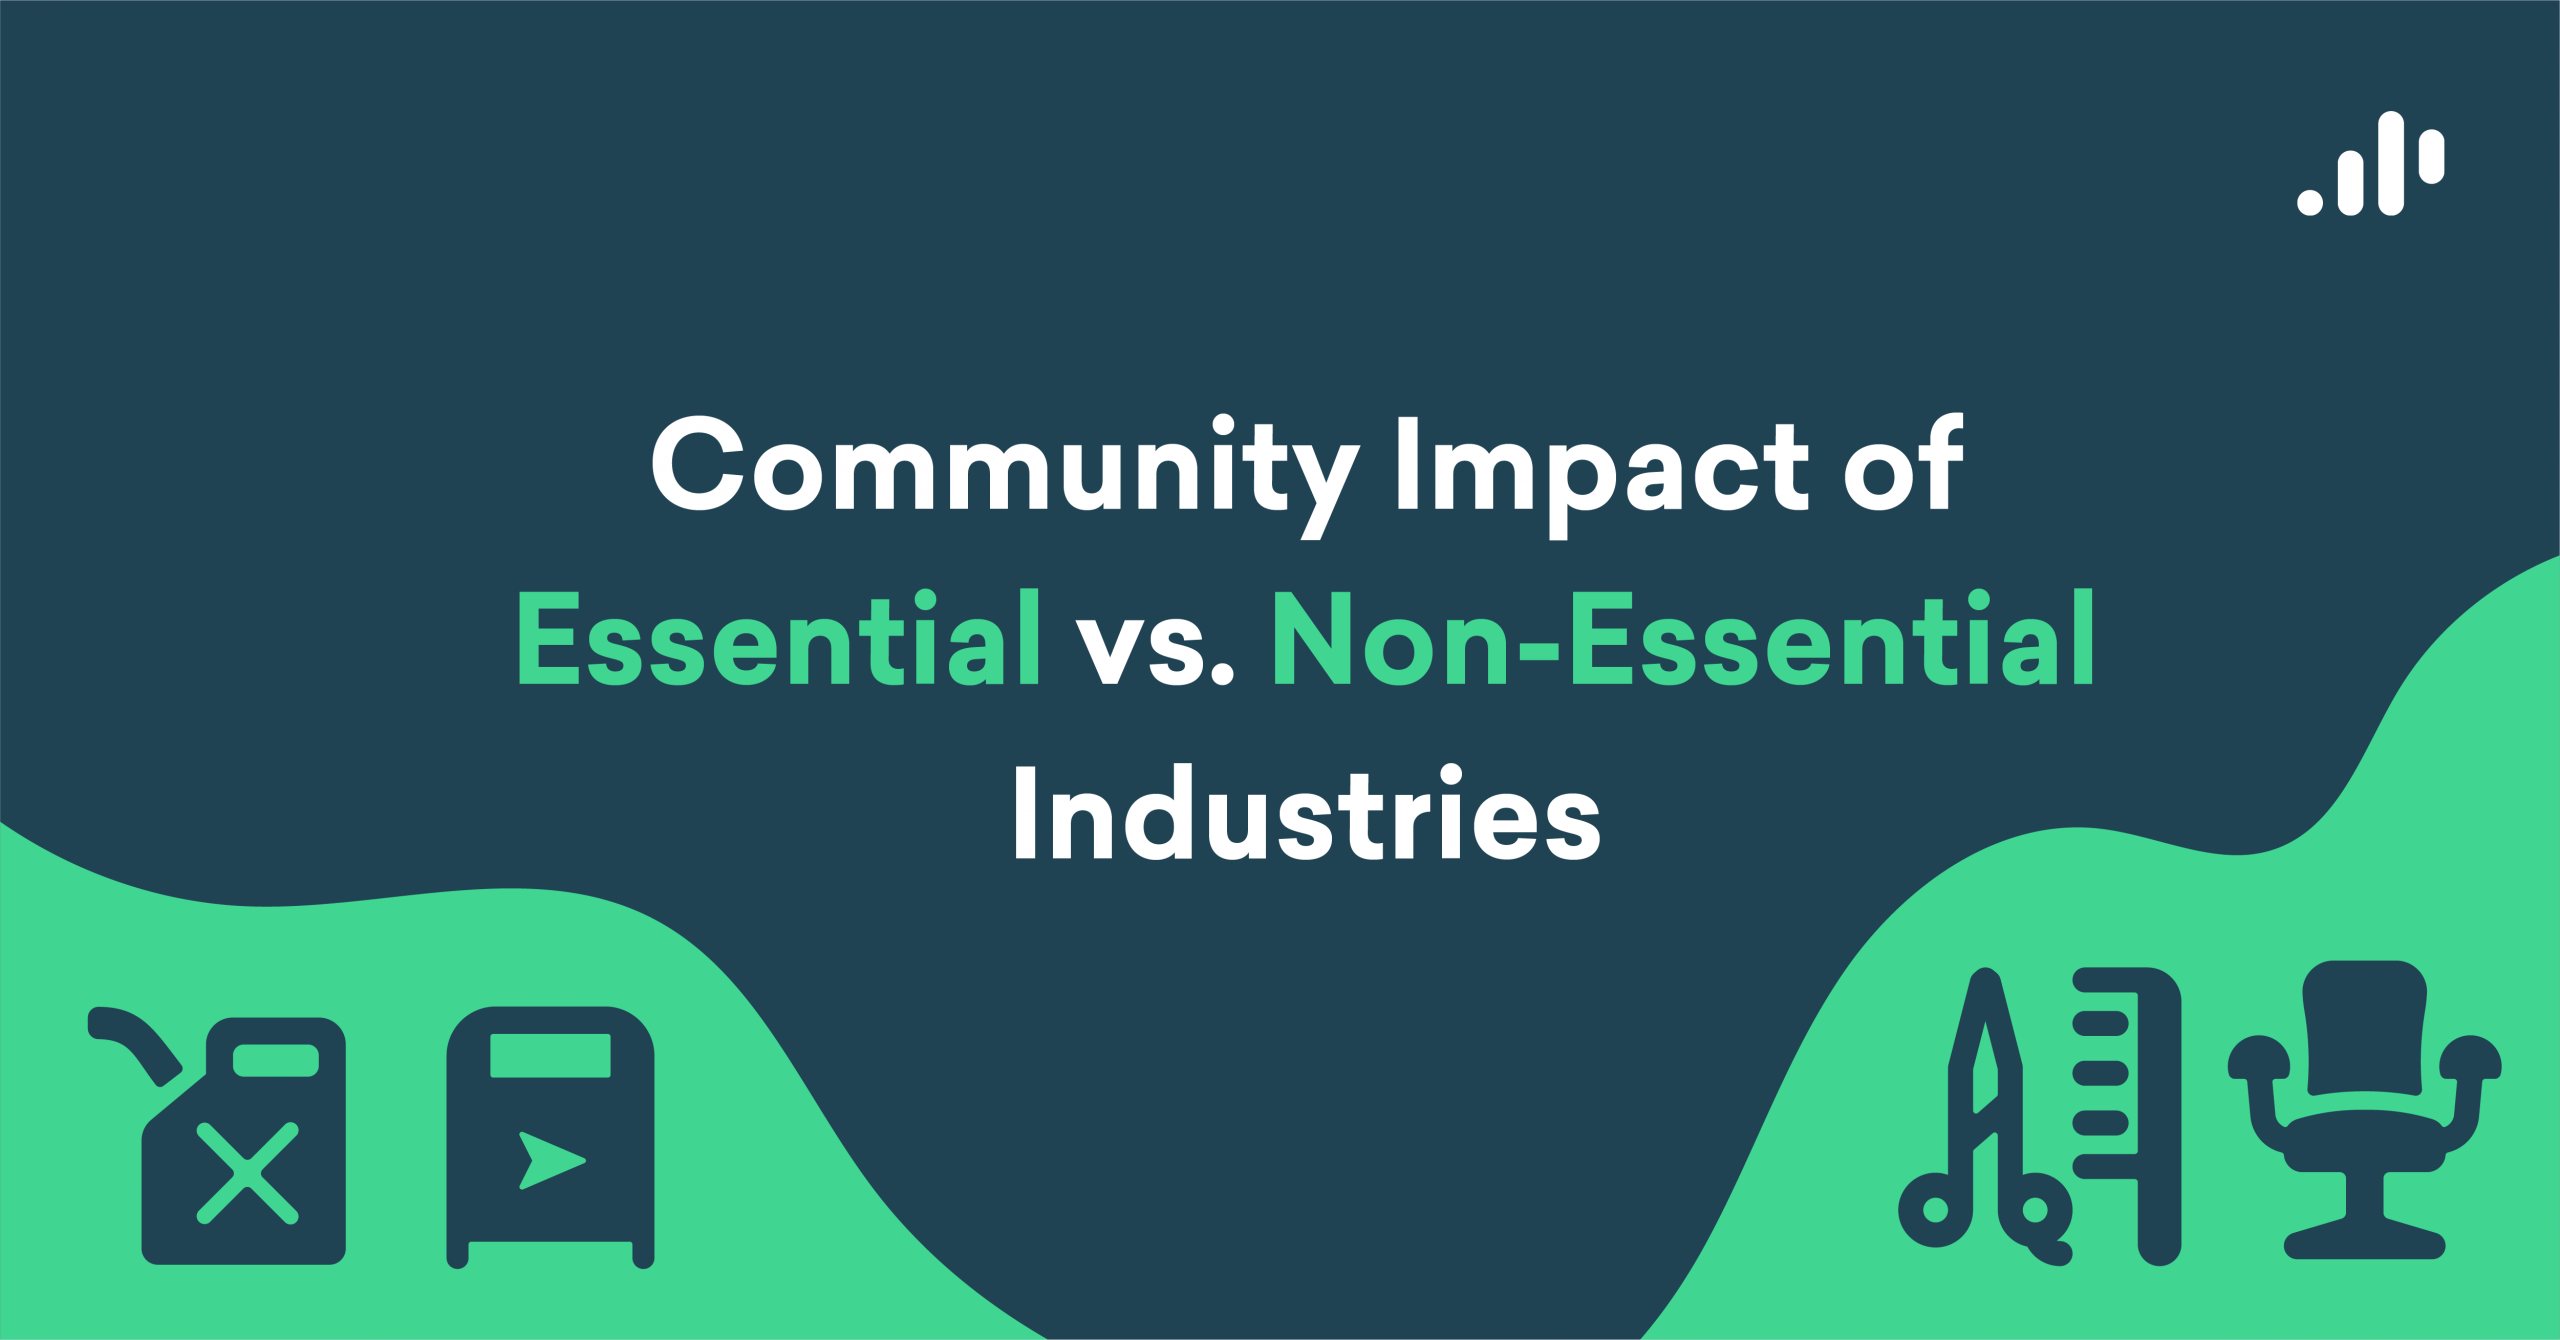 Exploring the Community Impact of the Essential vs. Non-Essential Industry Divide